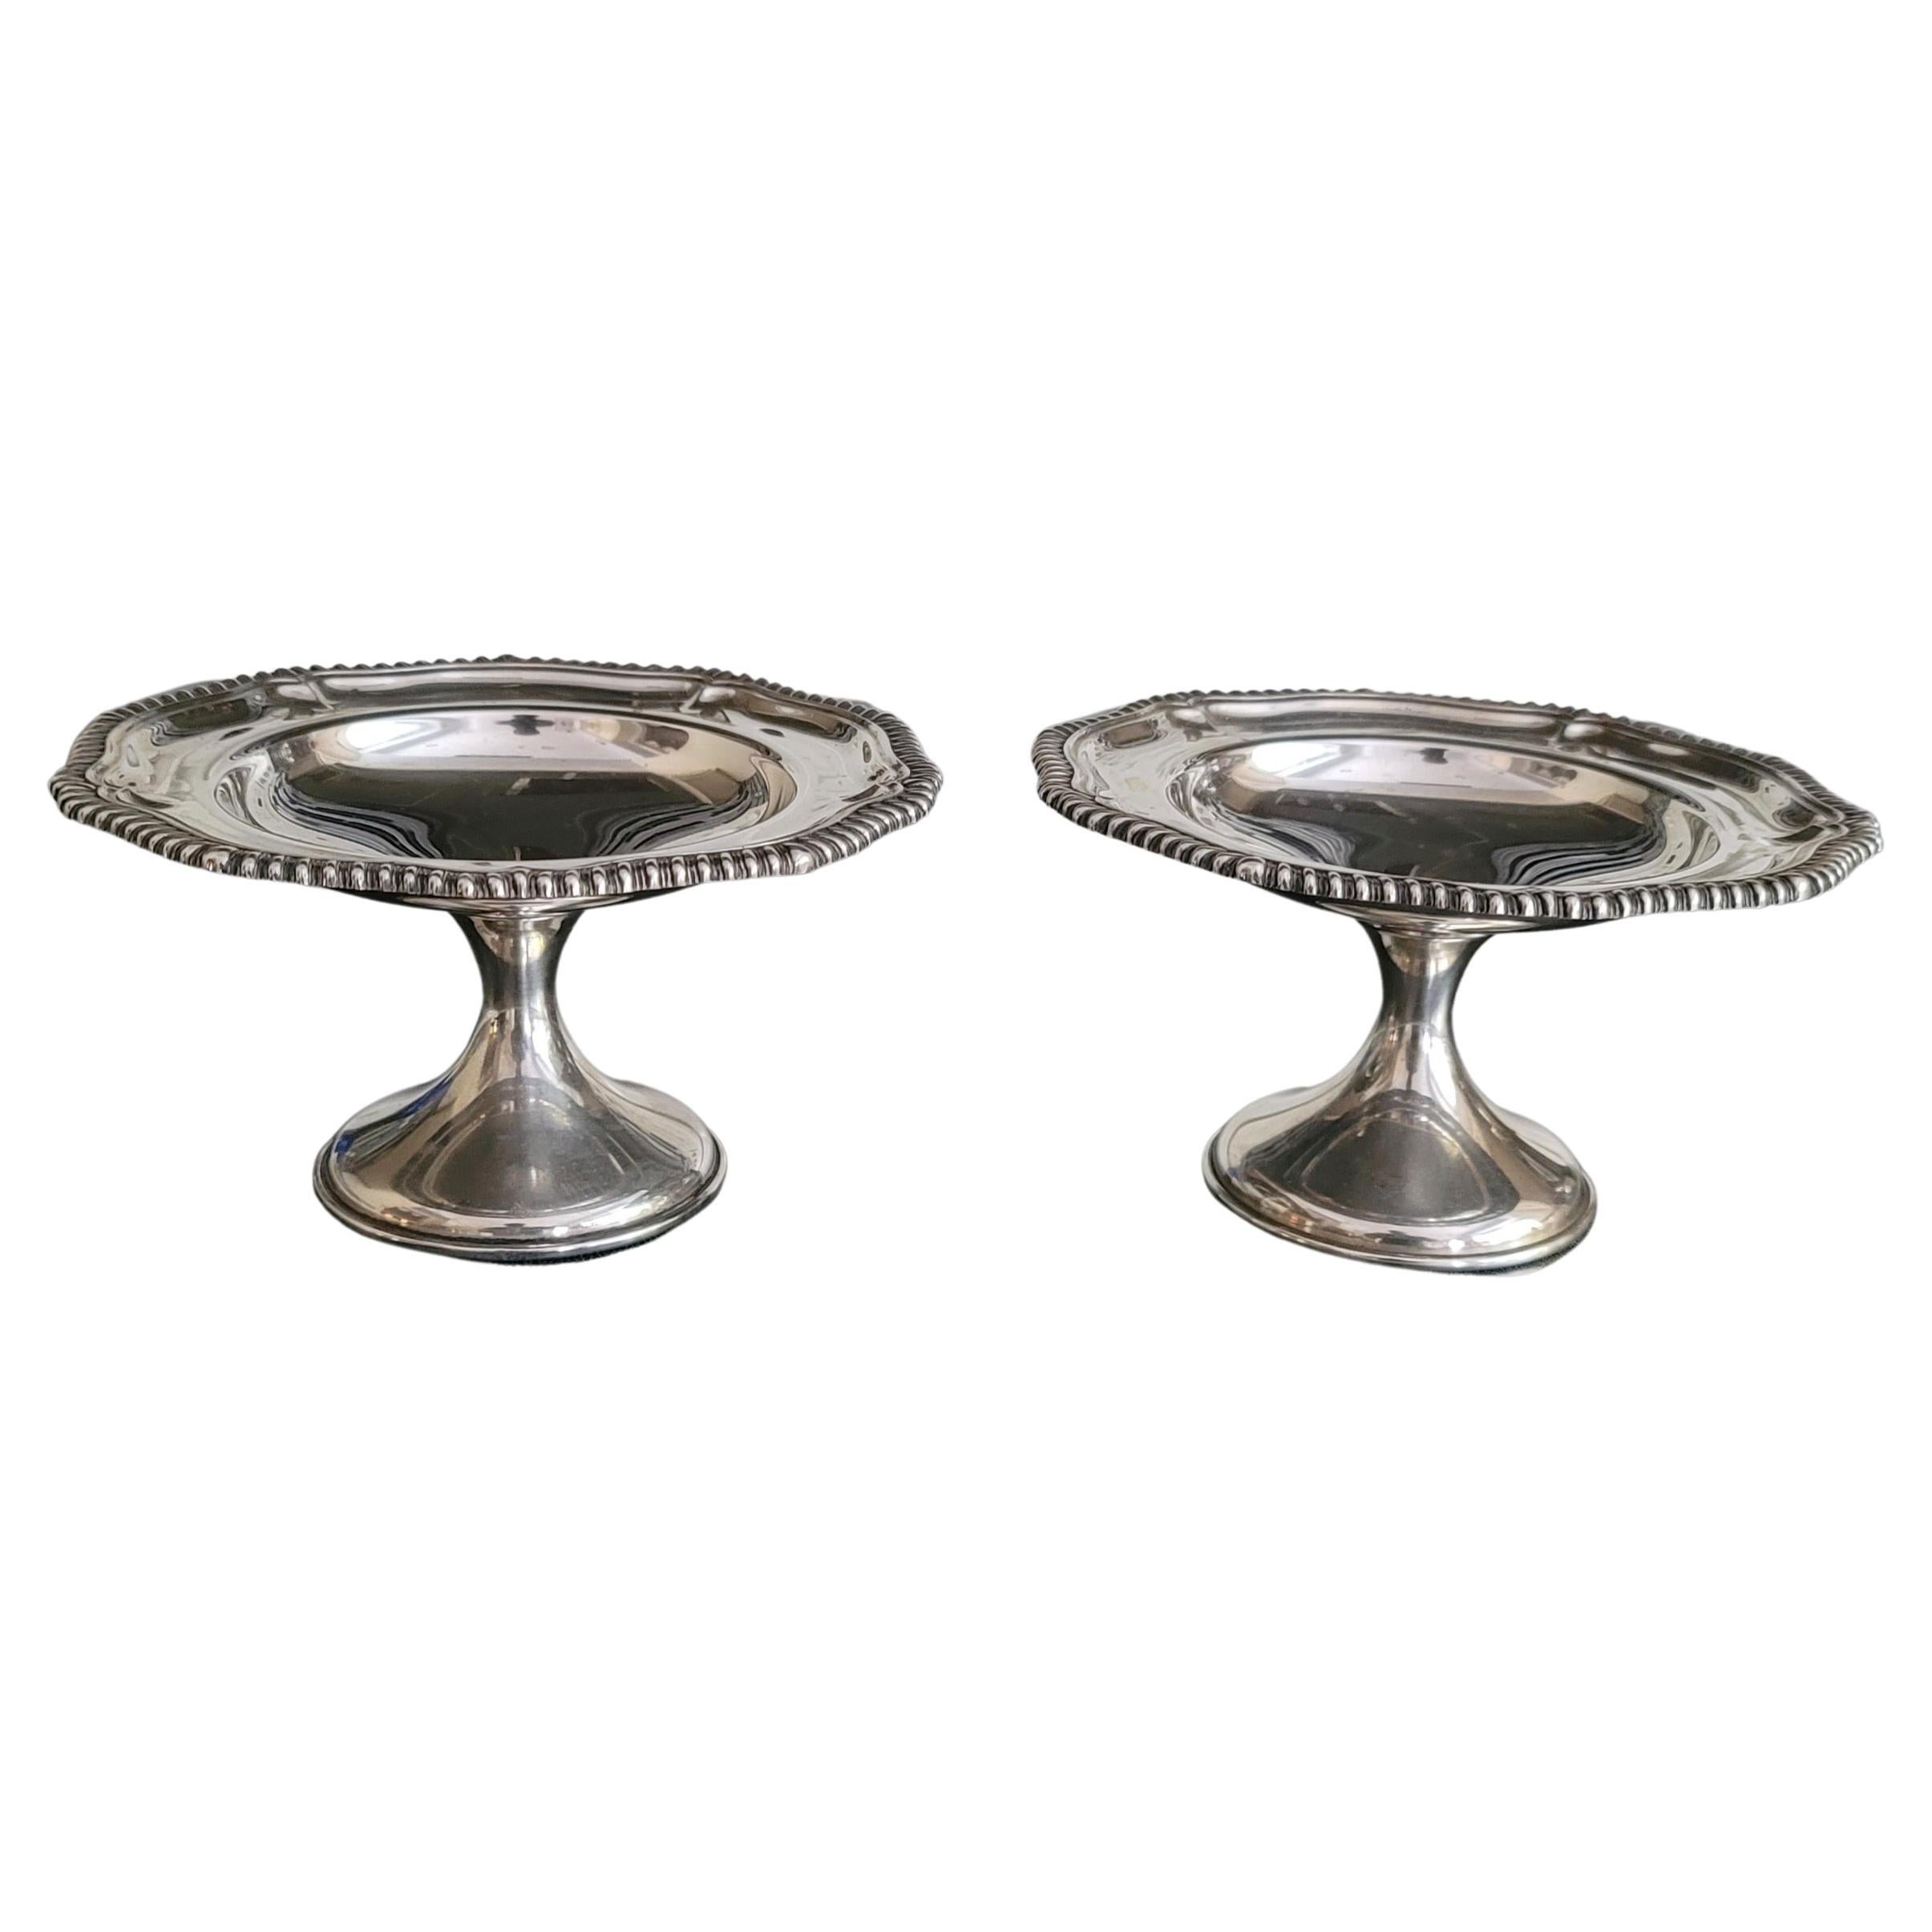 Pair of Gorham Weighted Sterling Silver Footed Compote Candy Nut Dishes